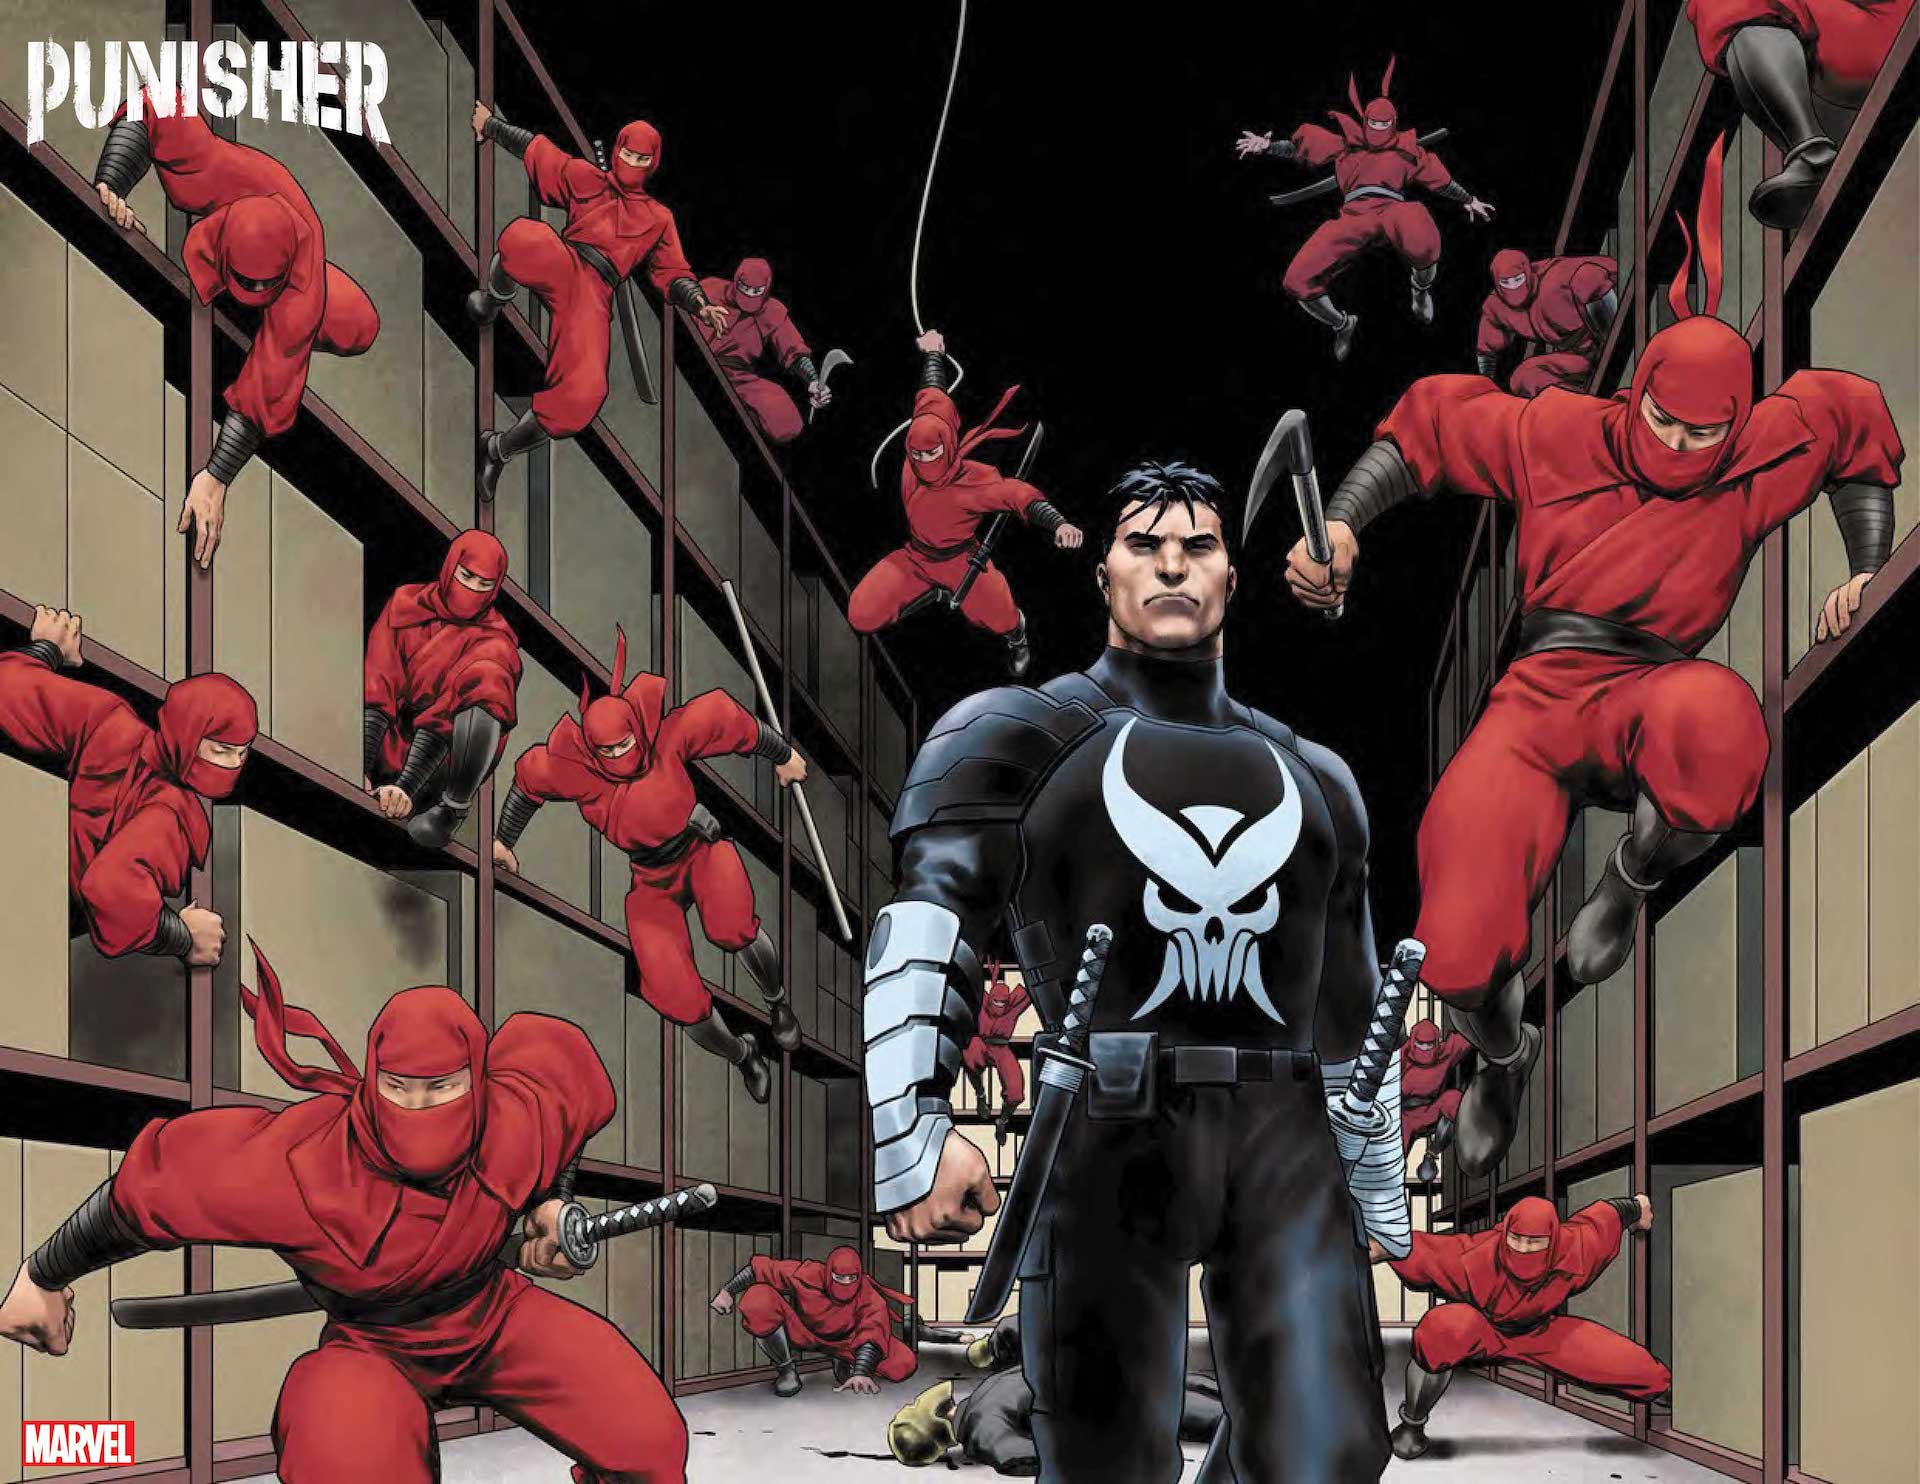 Marvel First Look: Punisher #1